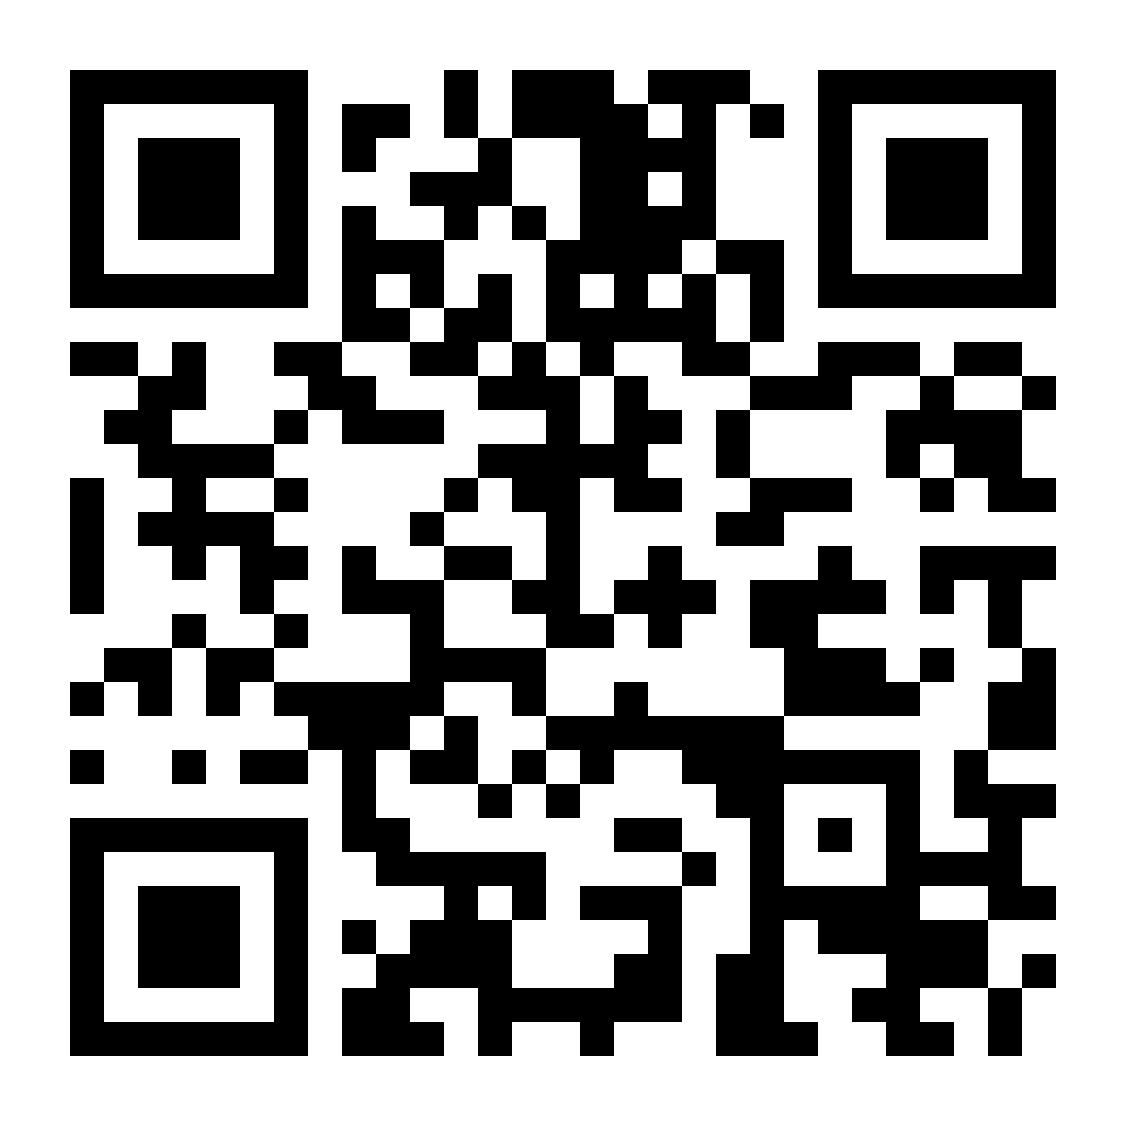 QRCode_ScaricaApp_LPTariffe_SitoES